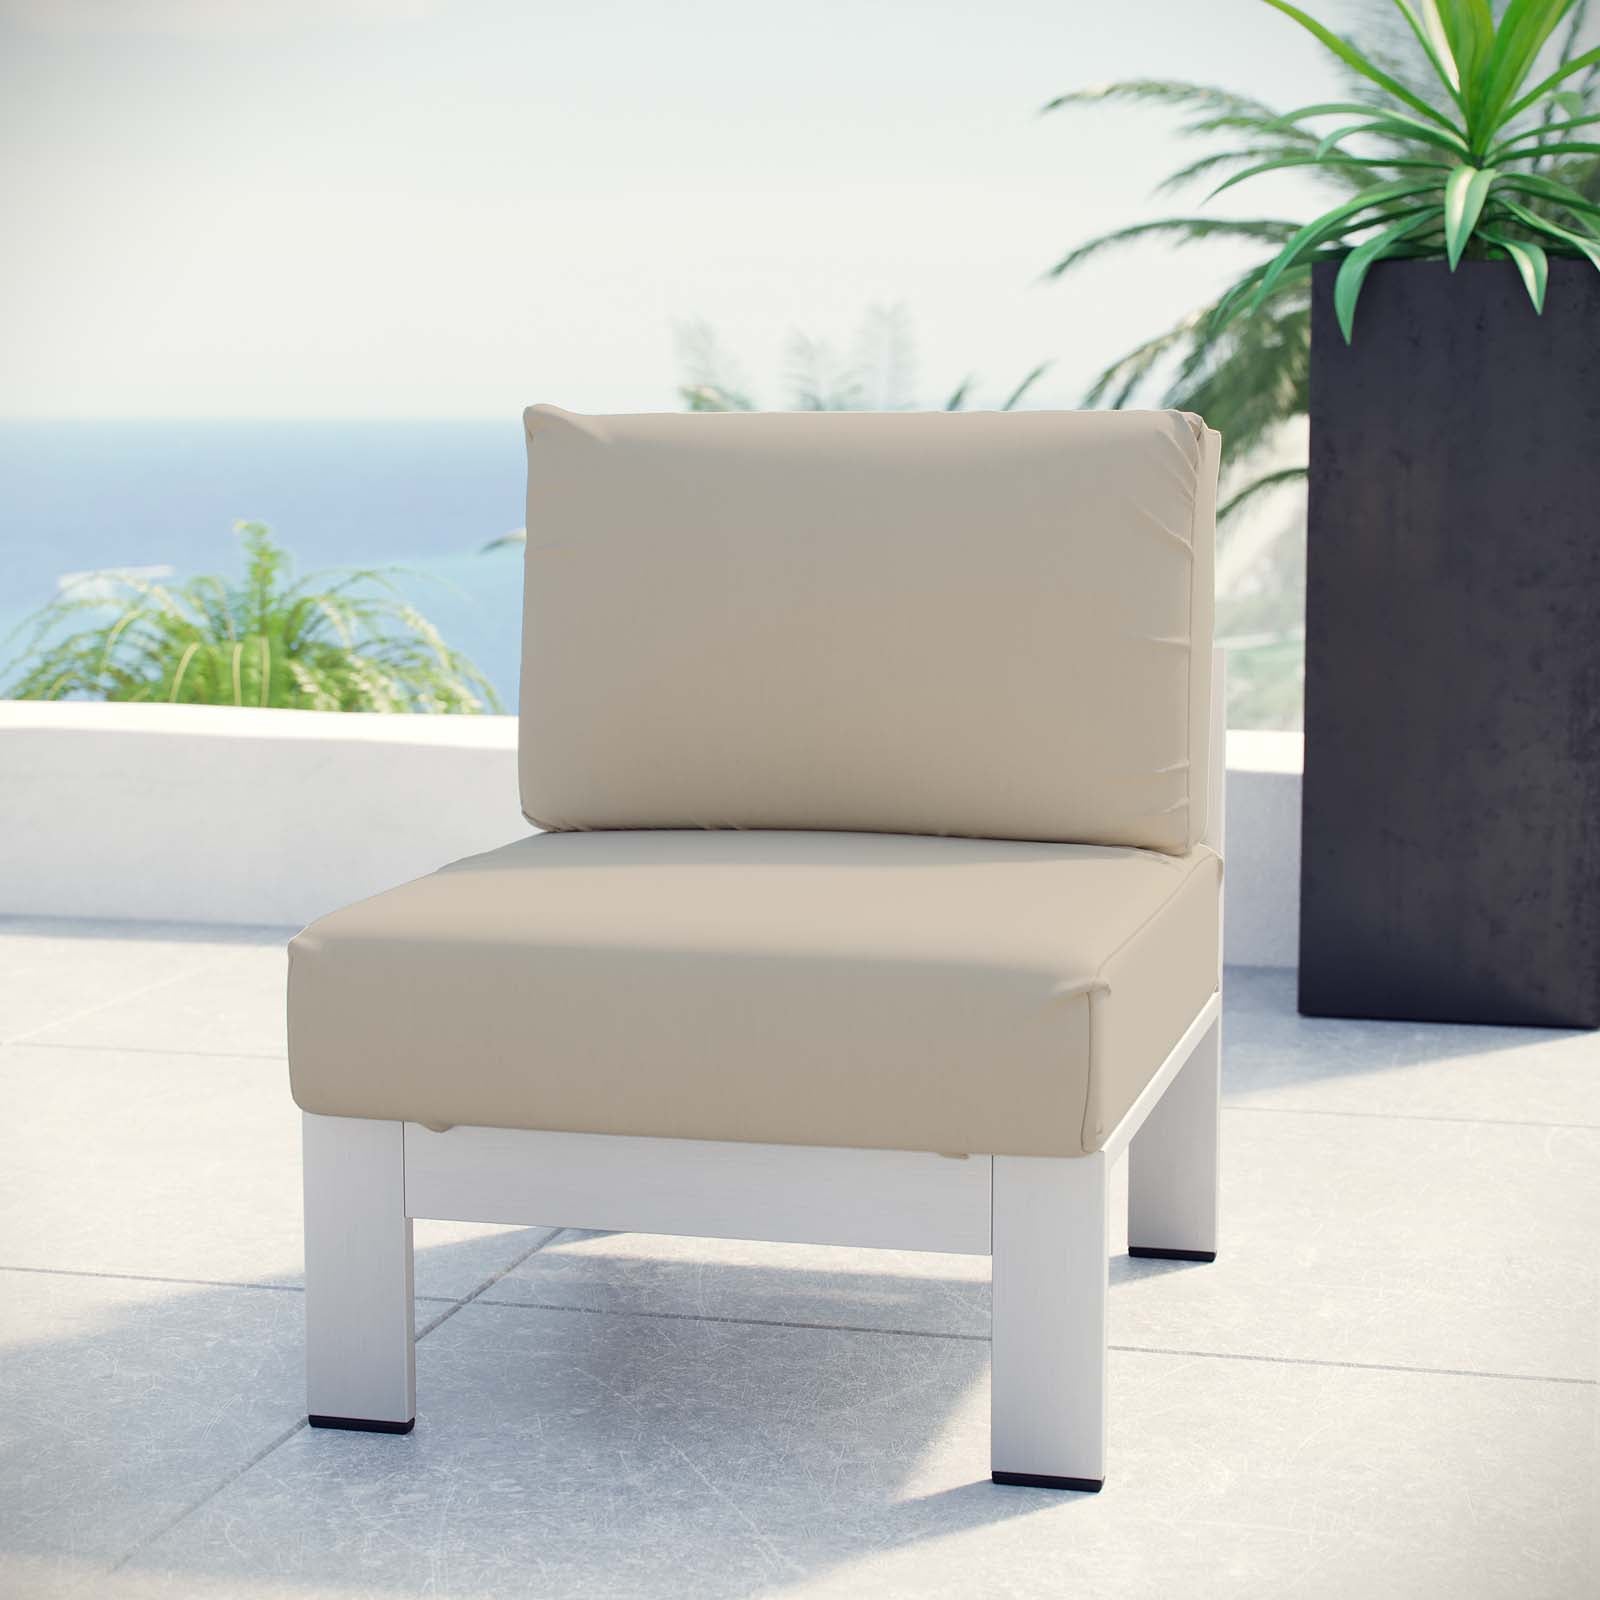 Shore Armless Outdoor Patio Aluminum Chair - East Shore Modern Home Furnishings